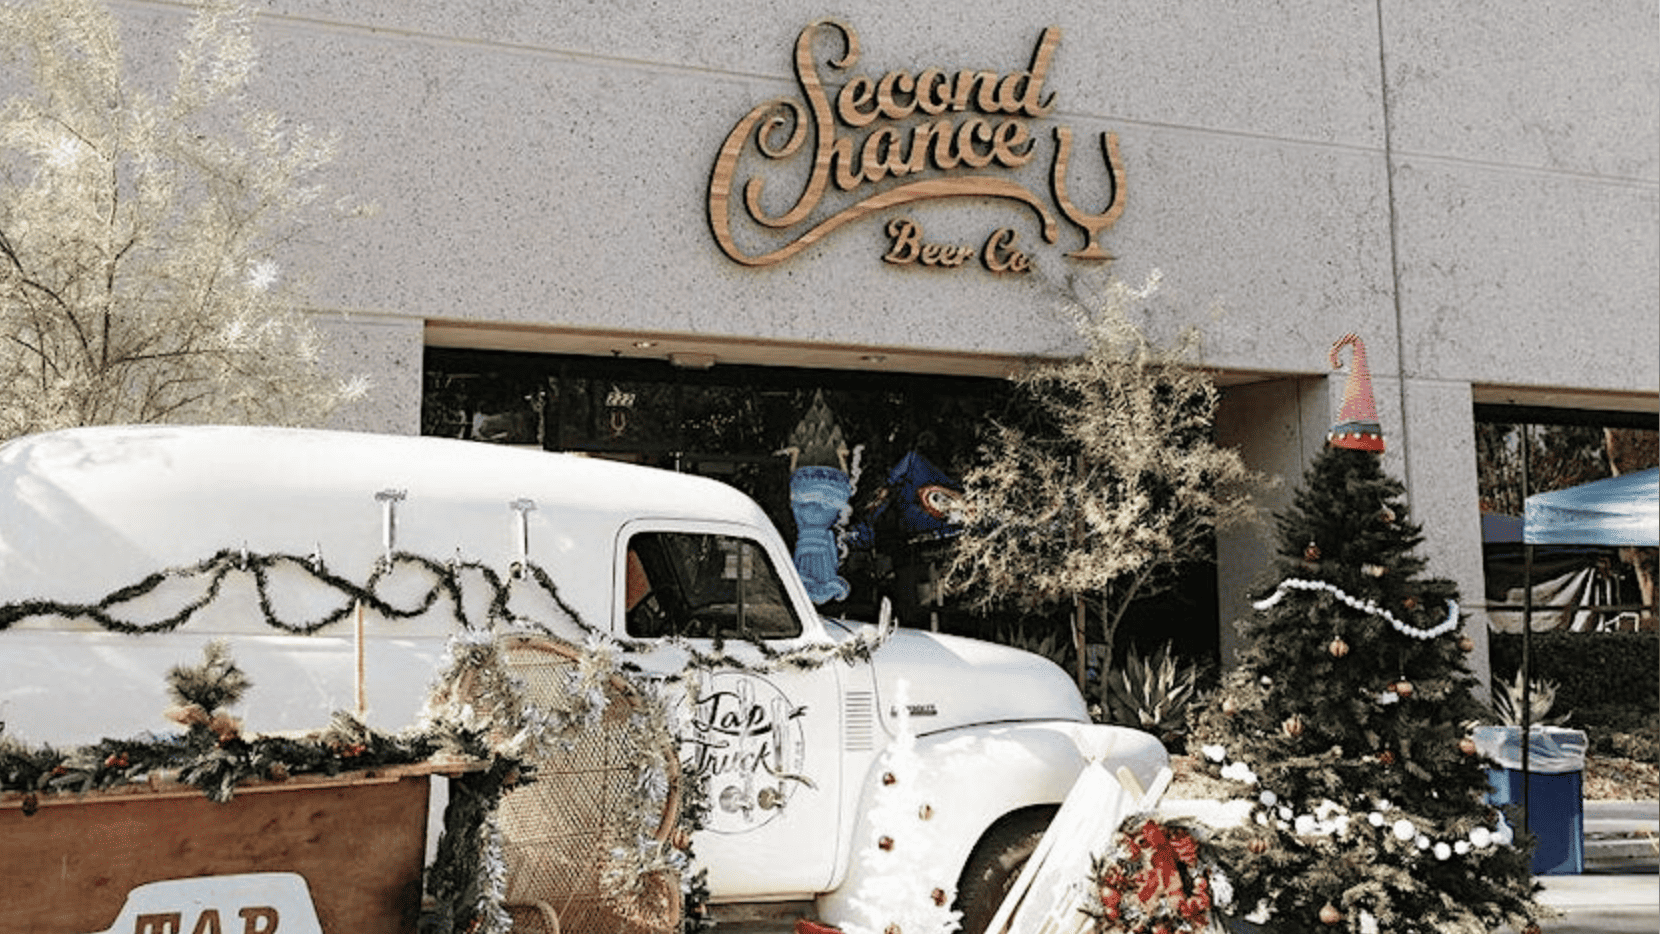 Second Chance Brewing Co. exterior